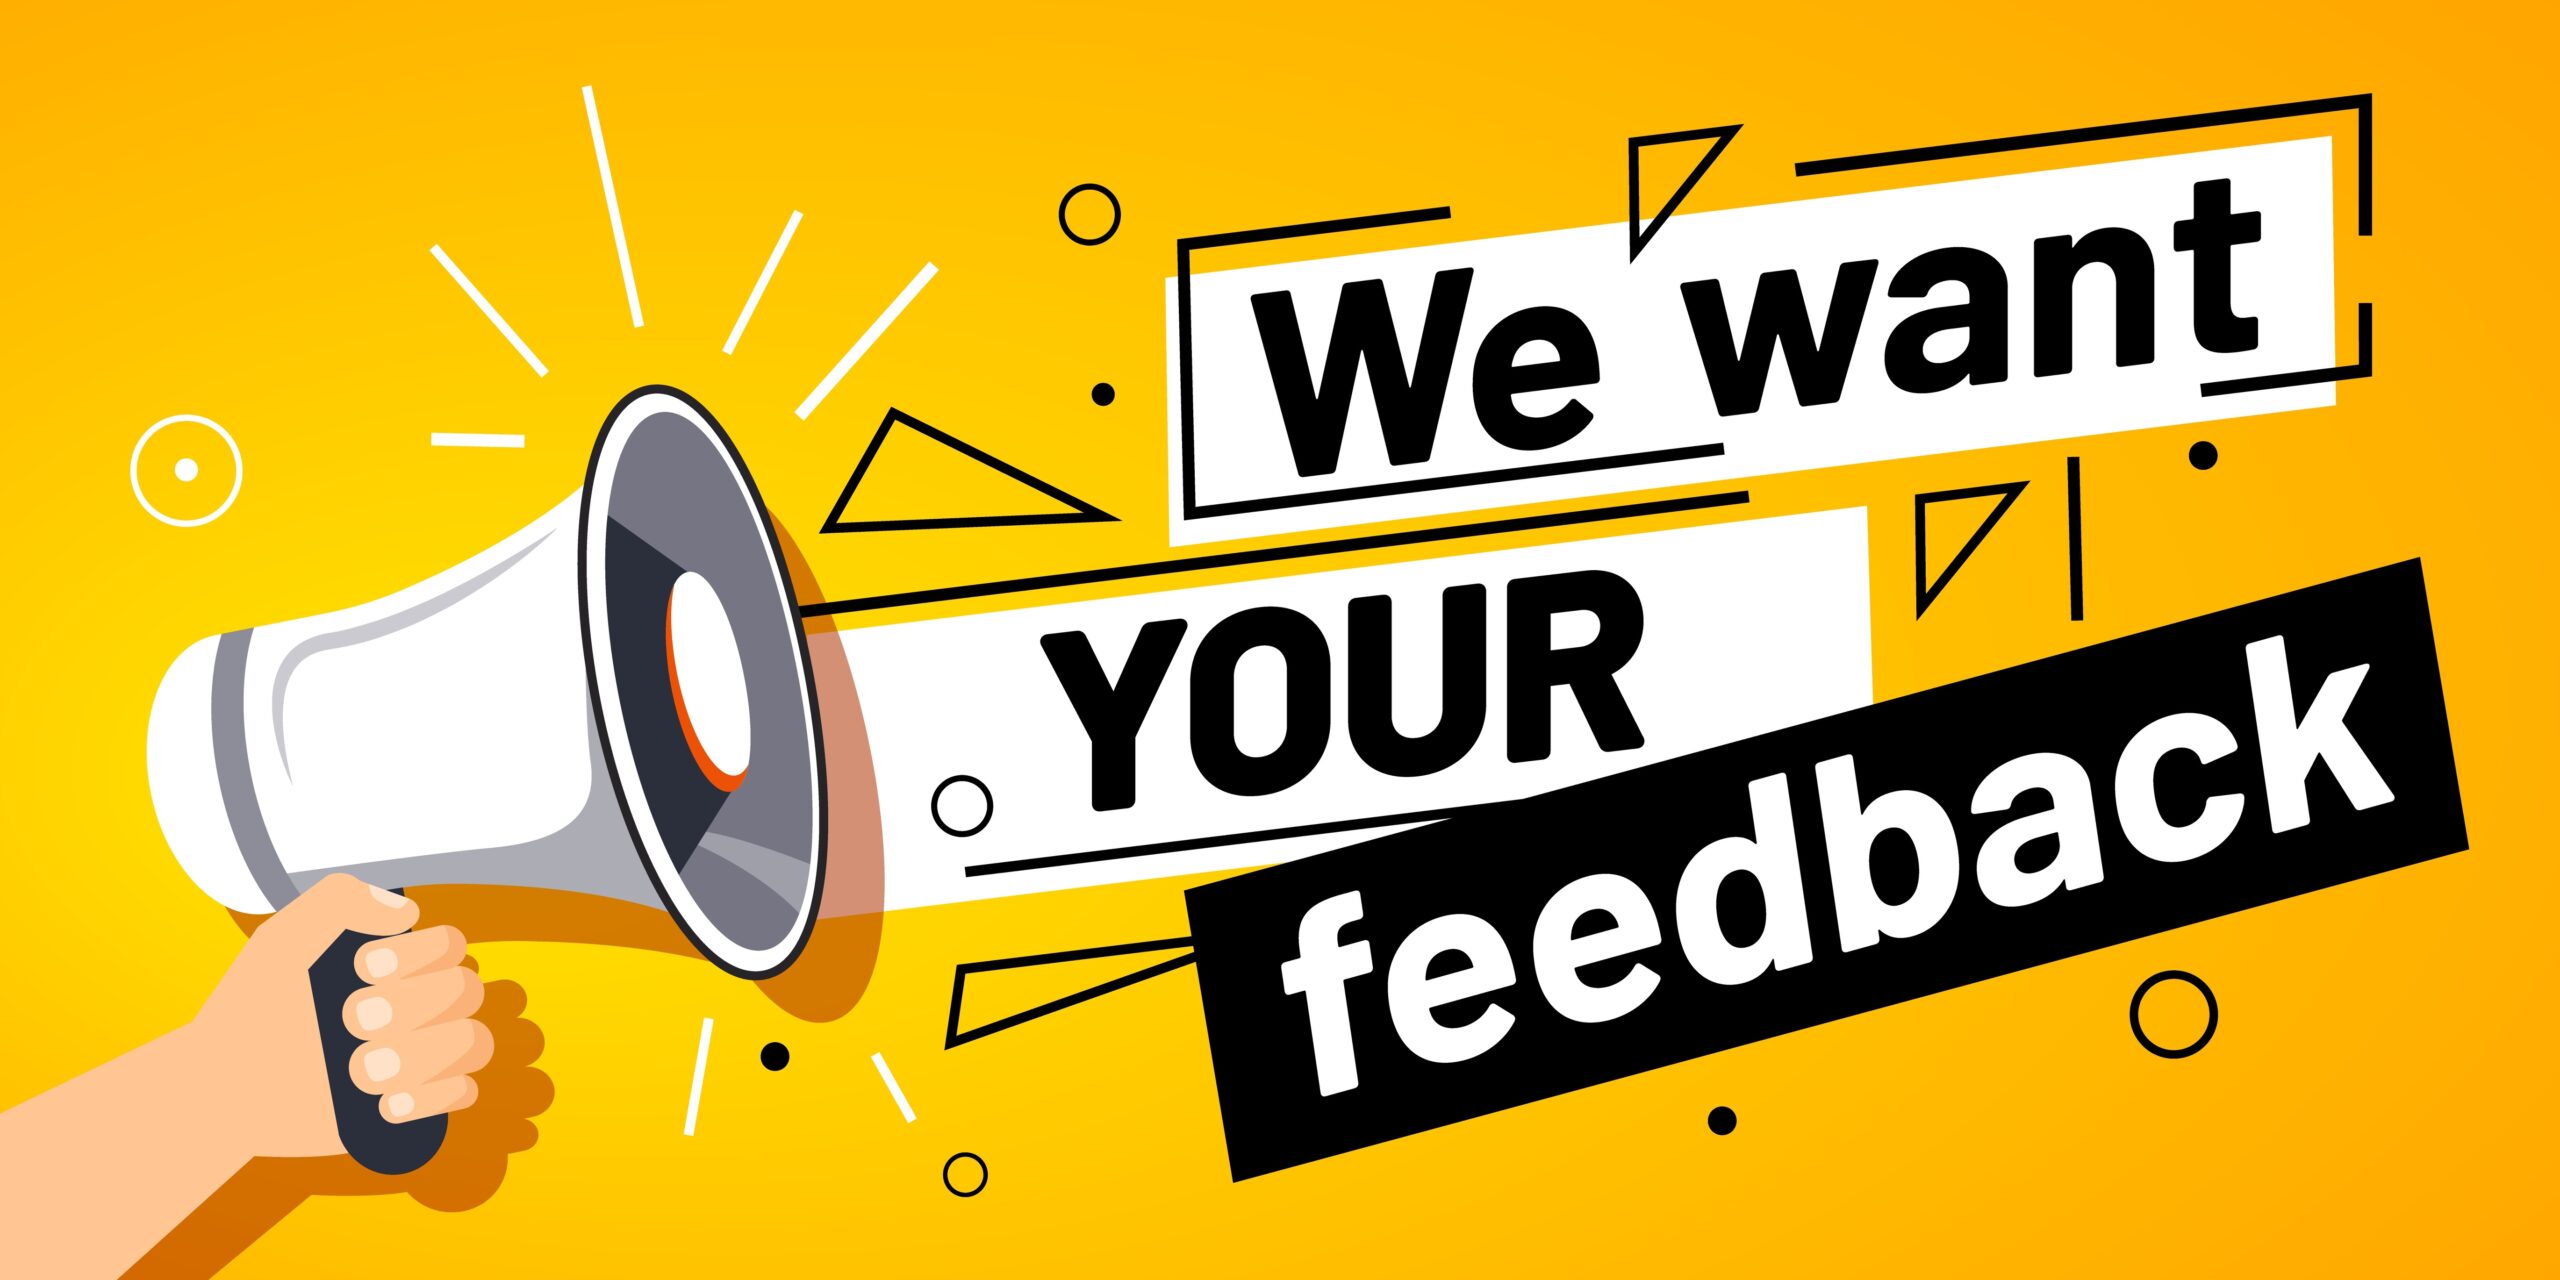 Featured image for “We Need Your Input”